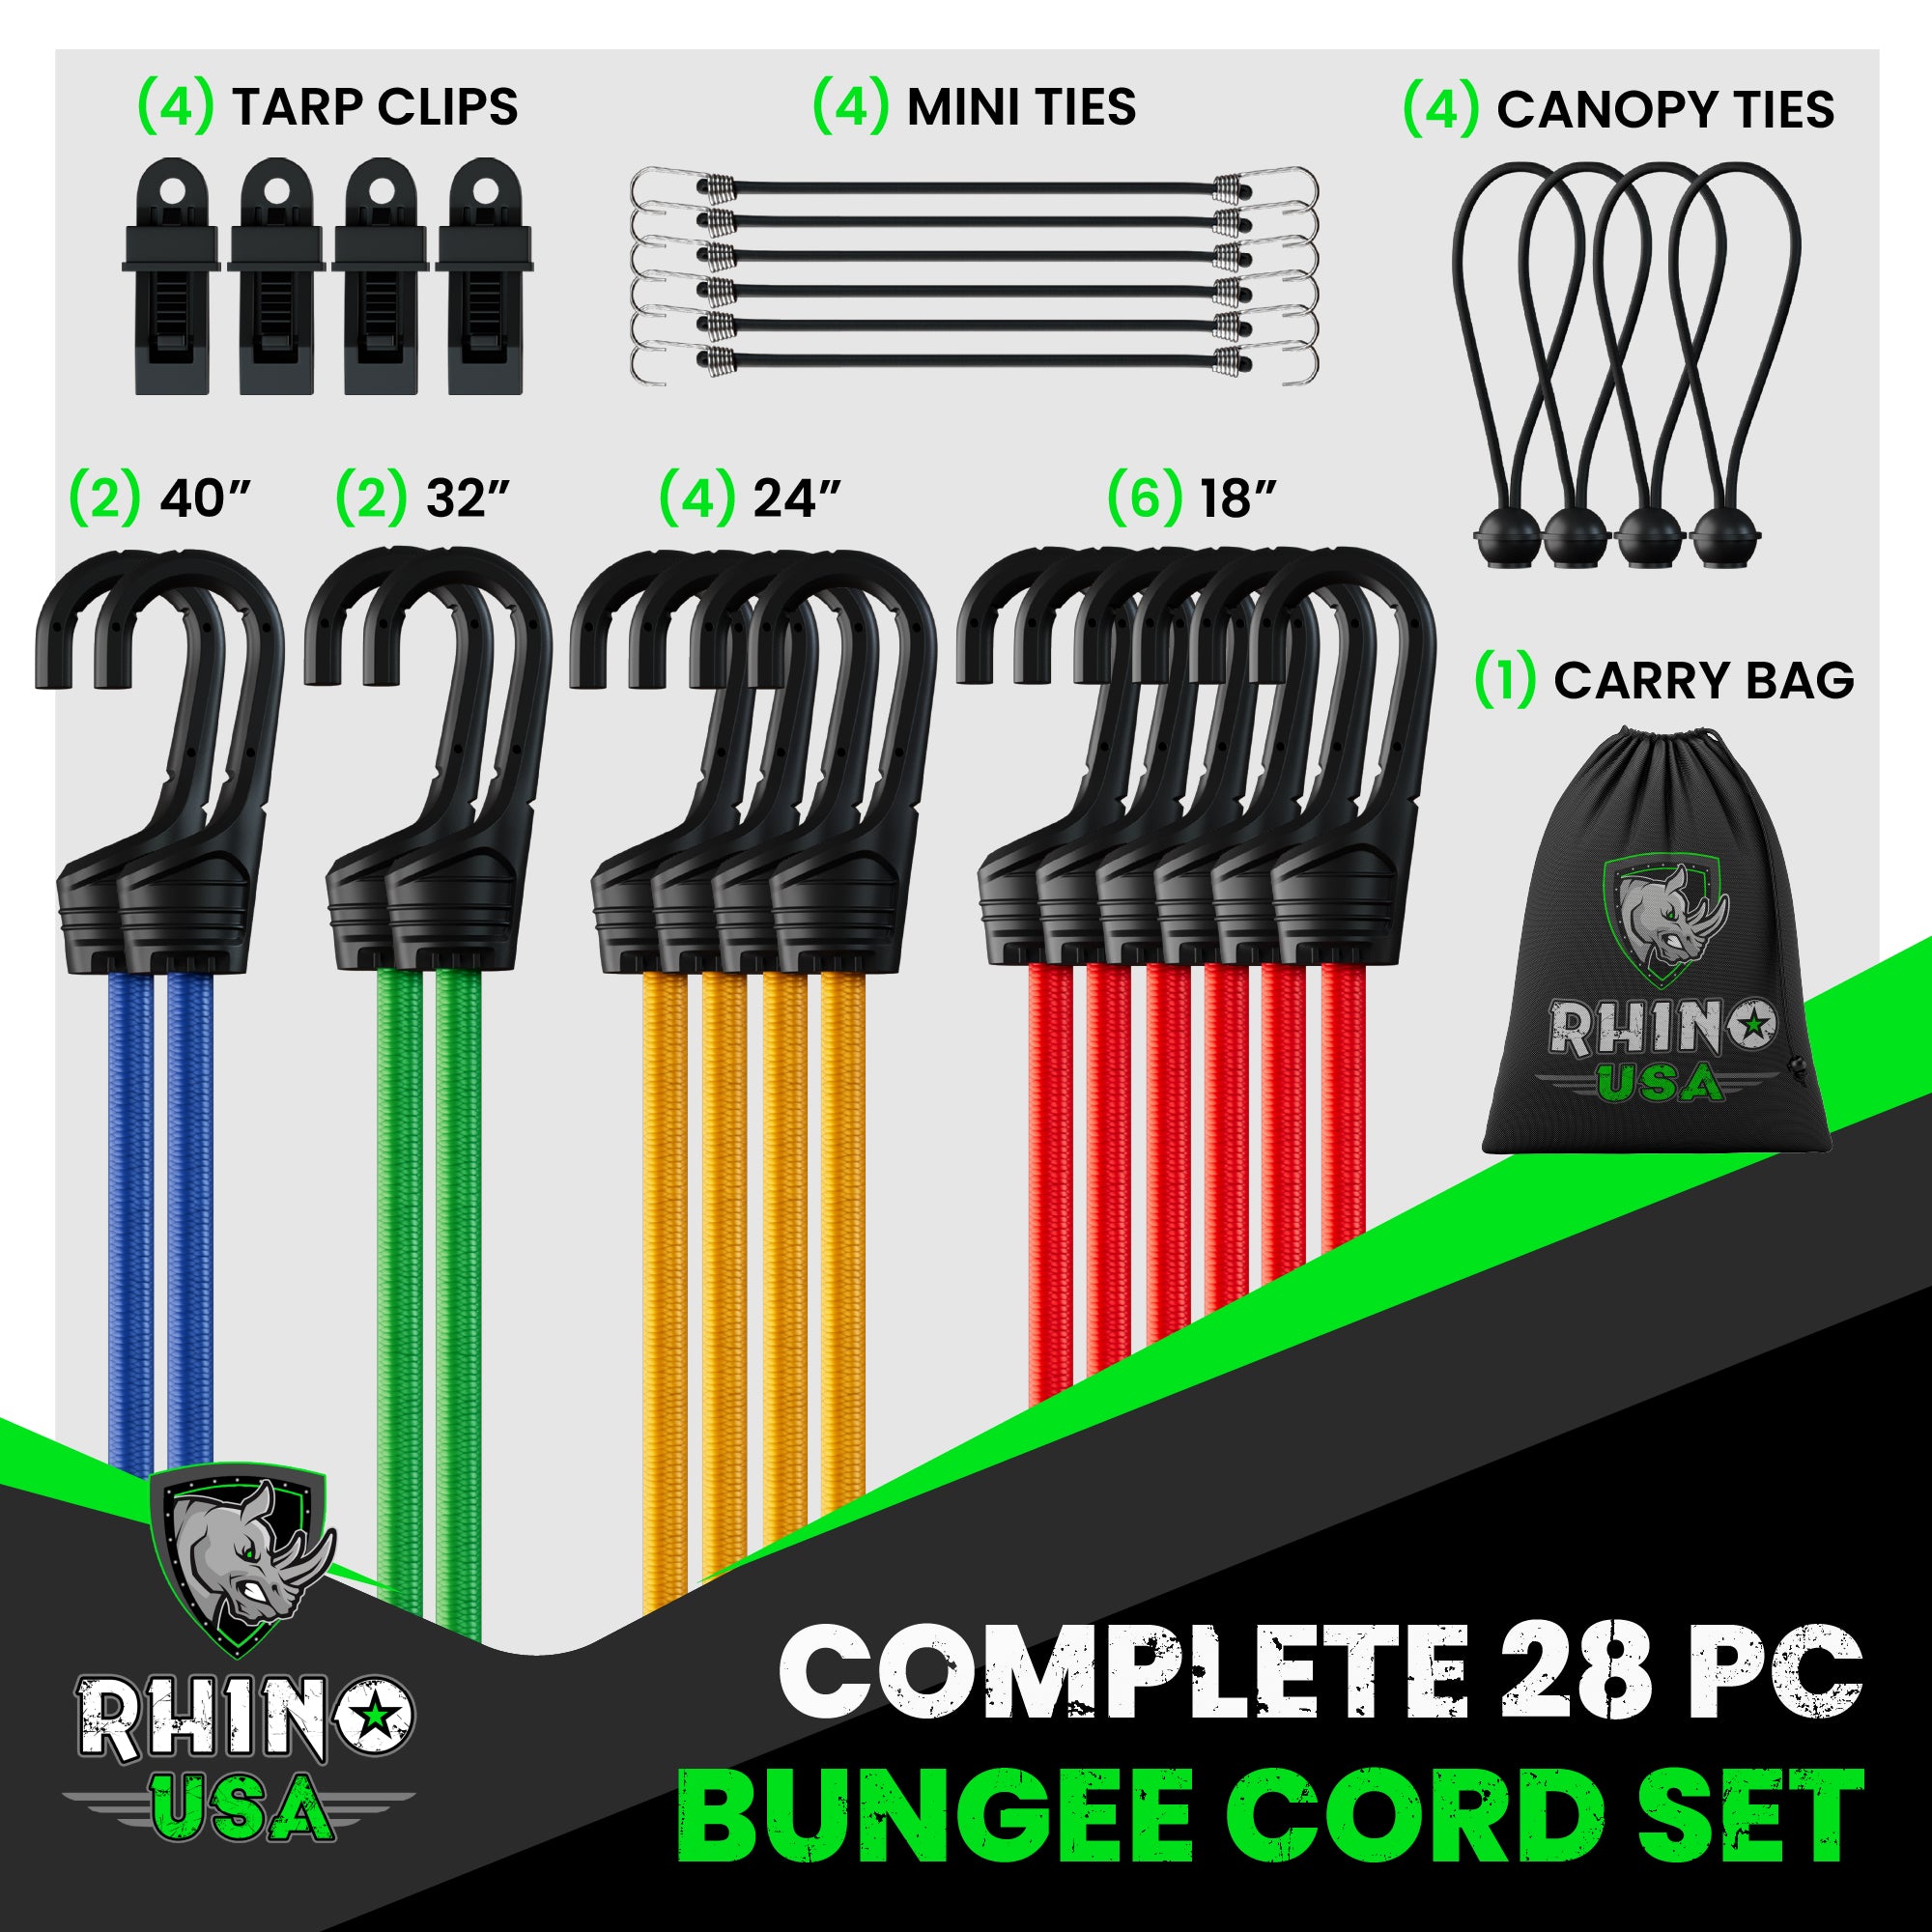 Cartman 32 Piece Bungee Cords Assortment Jar Includes 10 18 24 32 40  Bungee Cord with Hooks, 8 Canopy Tarp Ball Ties and Tarp Clips